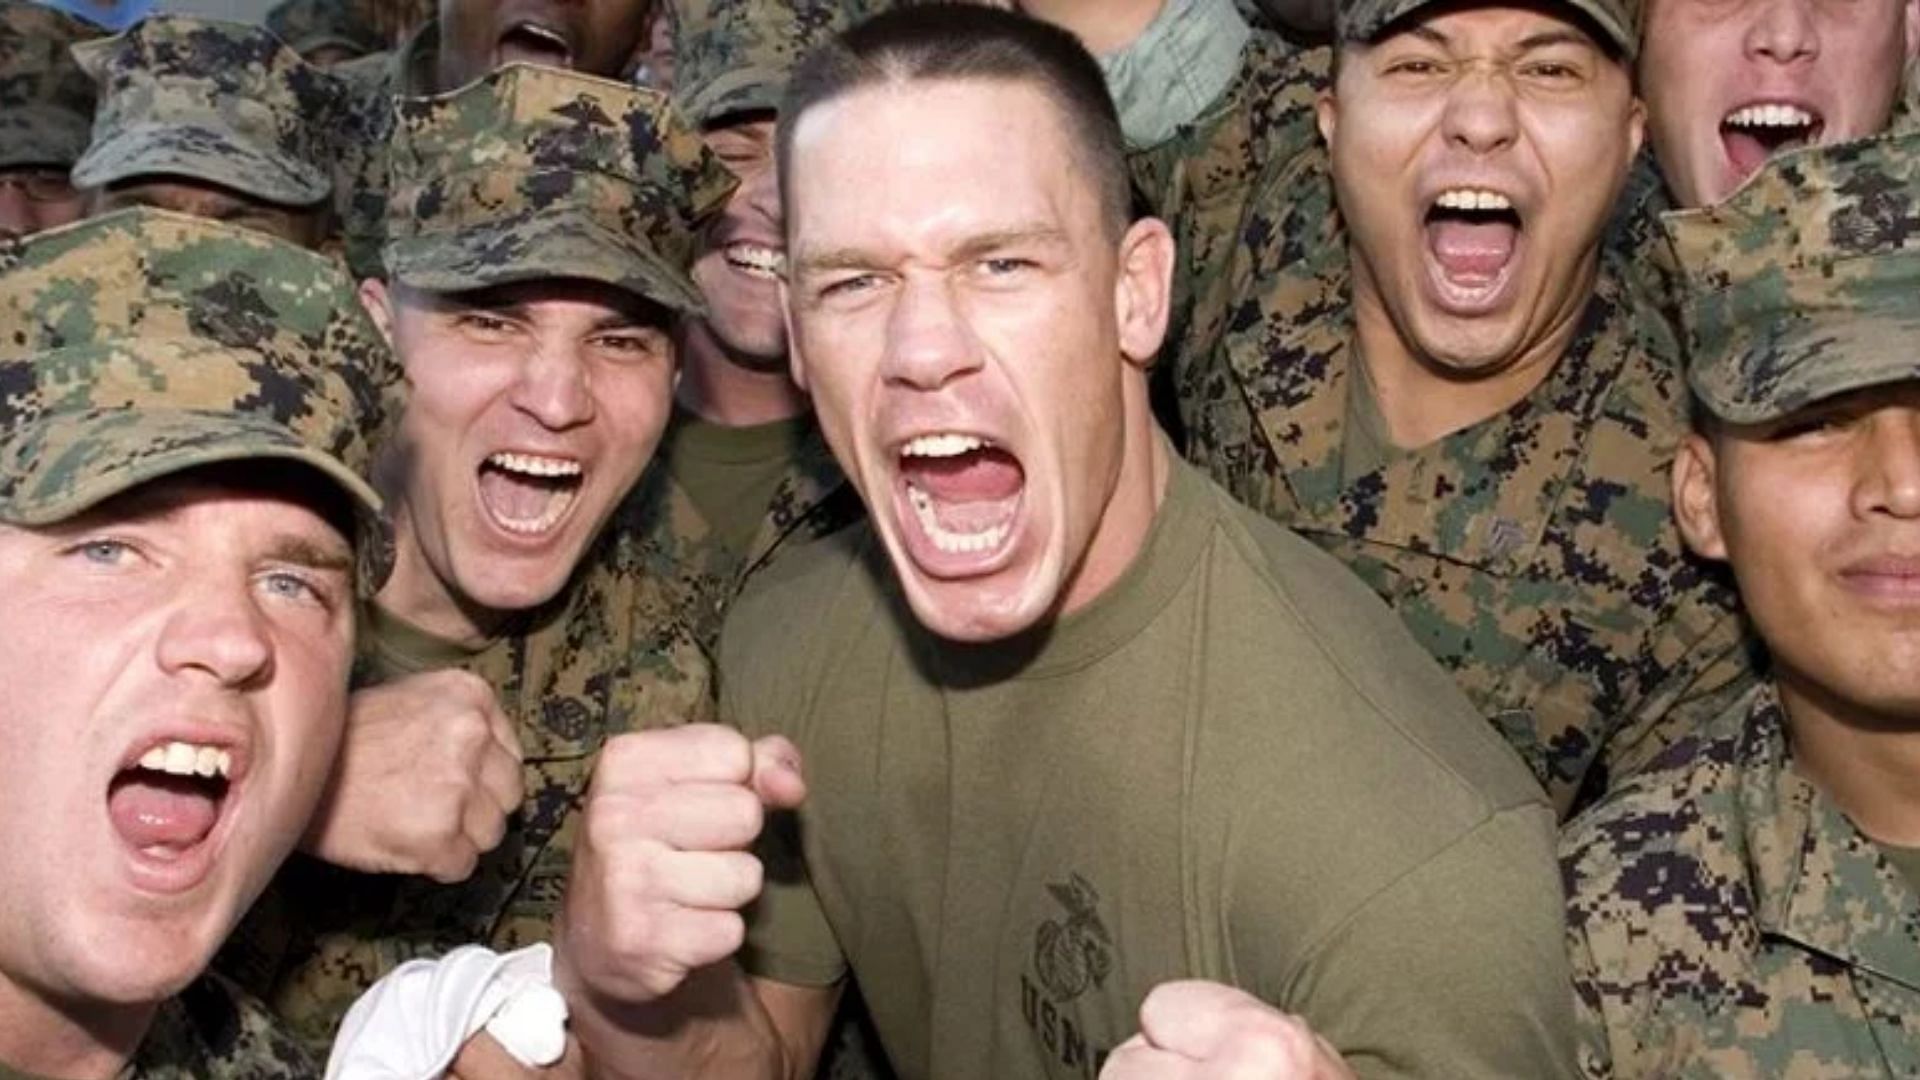 John Cena has been a life long supporter of the US Military. Image Credits: X